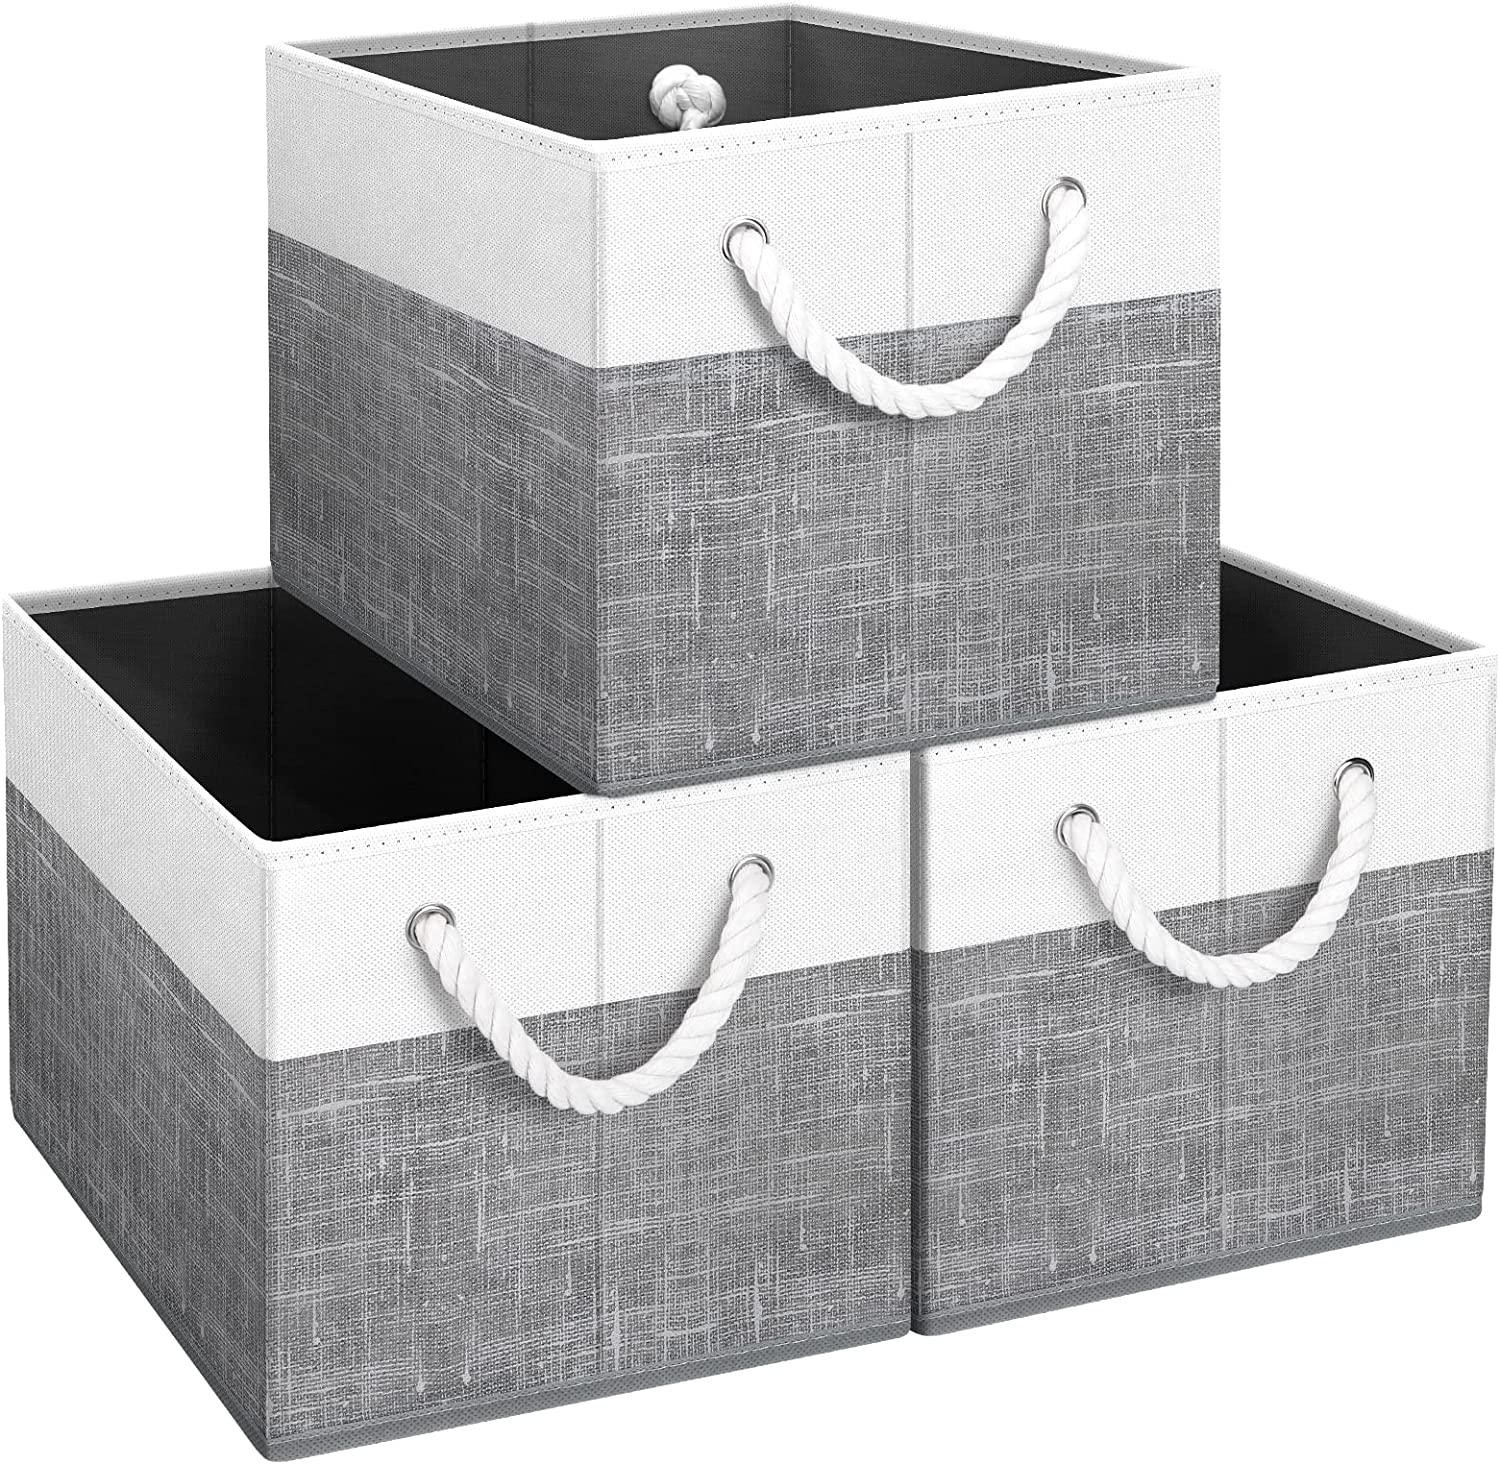 Fab totes Reinforced Handle Collapsible Book Storage Boxes, 3-Pack